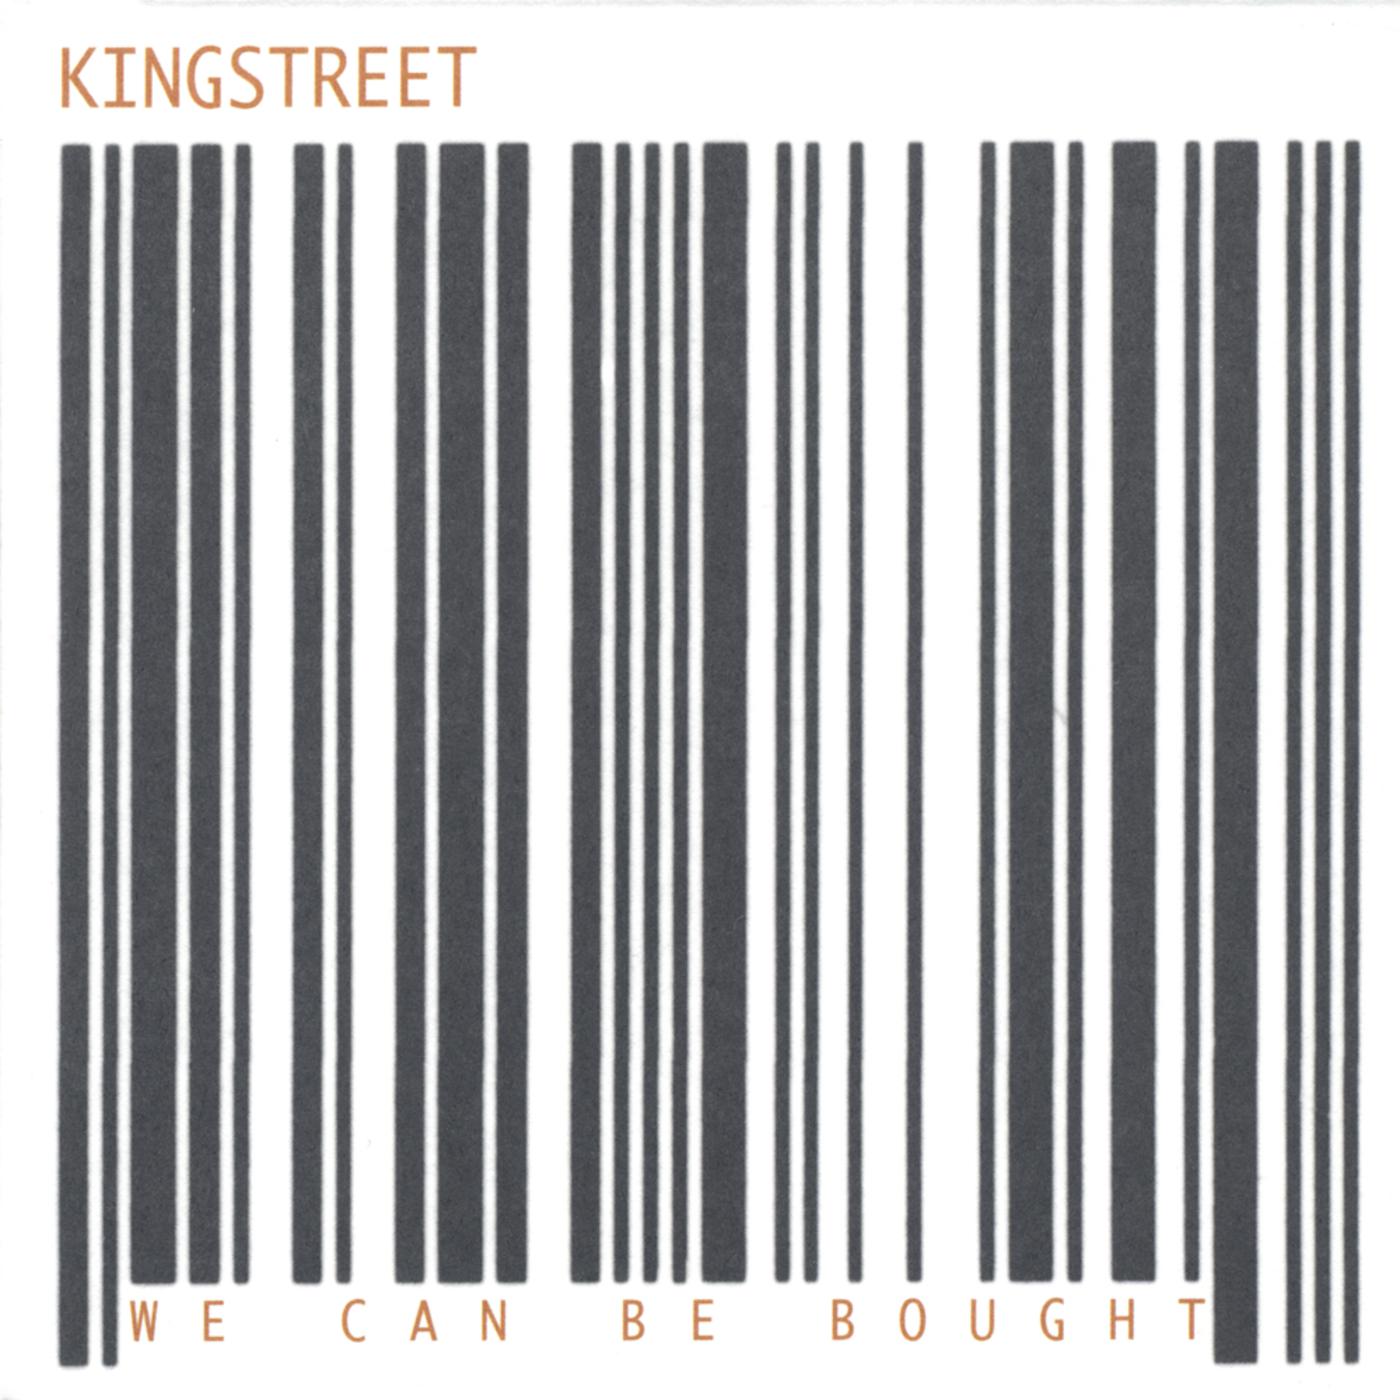 KingStreet - Nothing Ever Changes